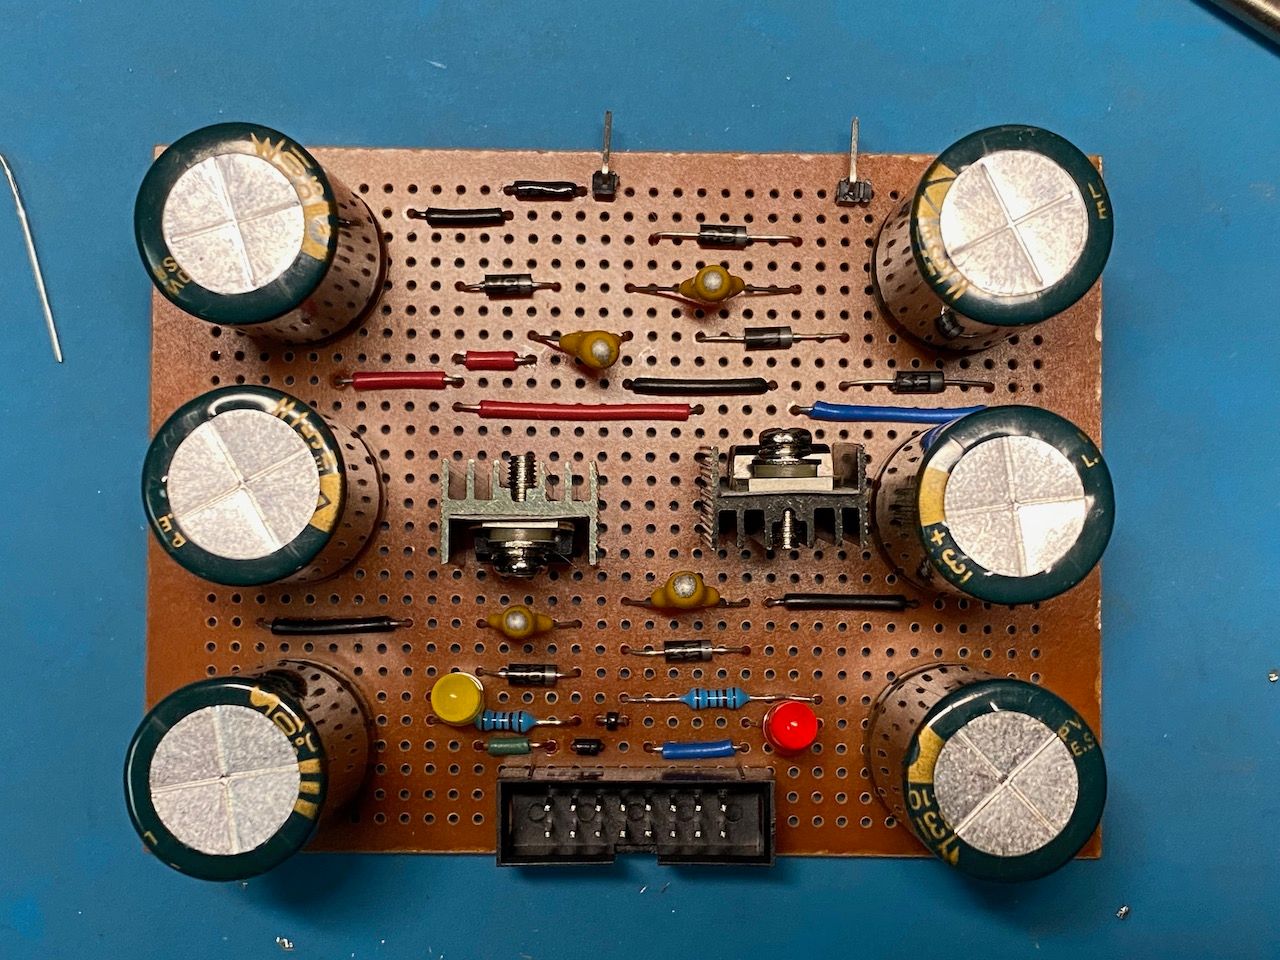 Stripboard with electronic components, box plug, and LEDs